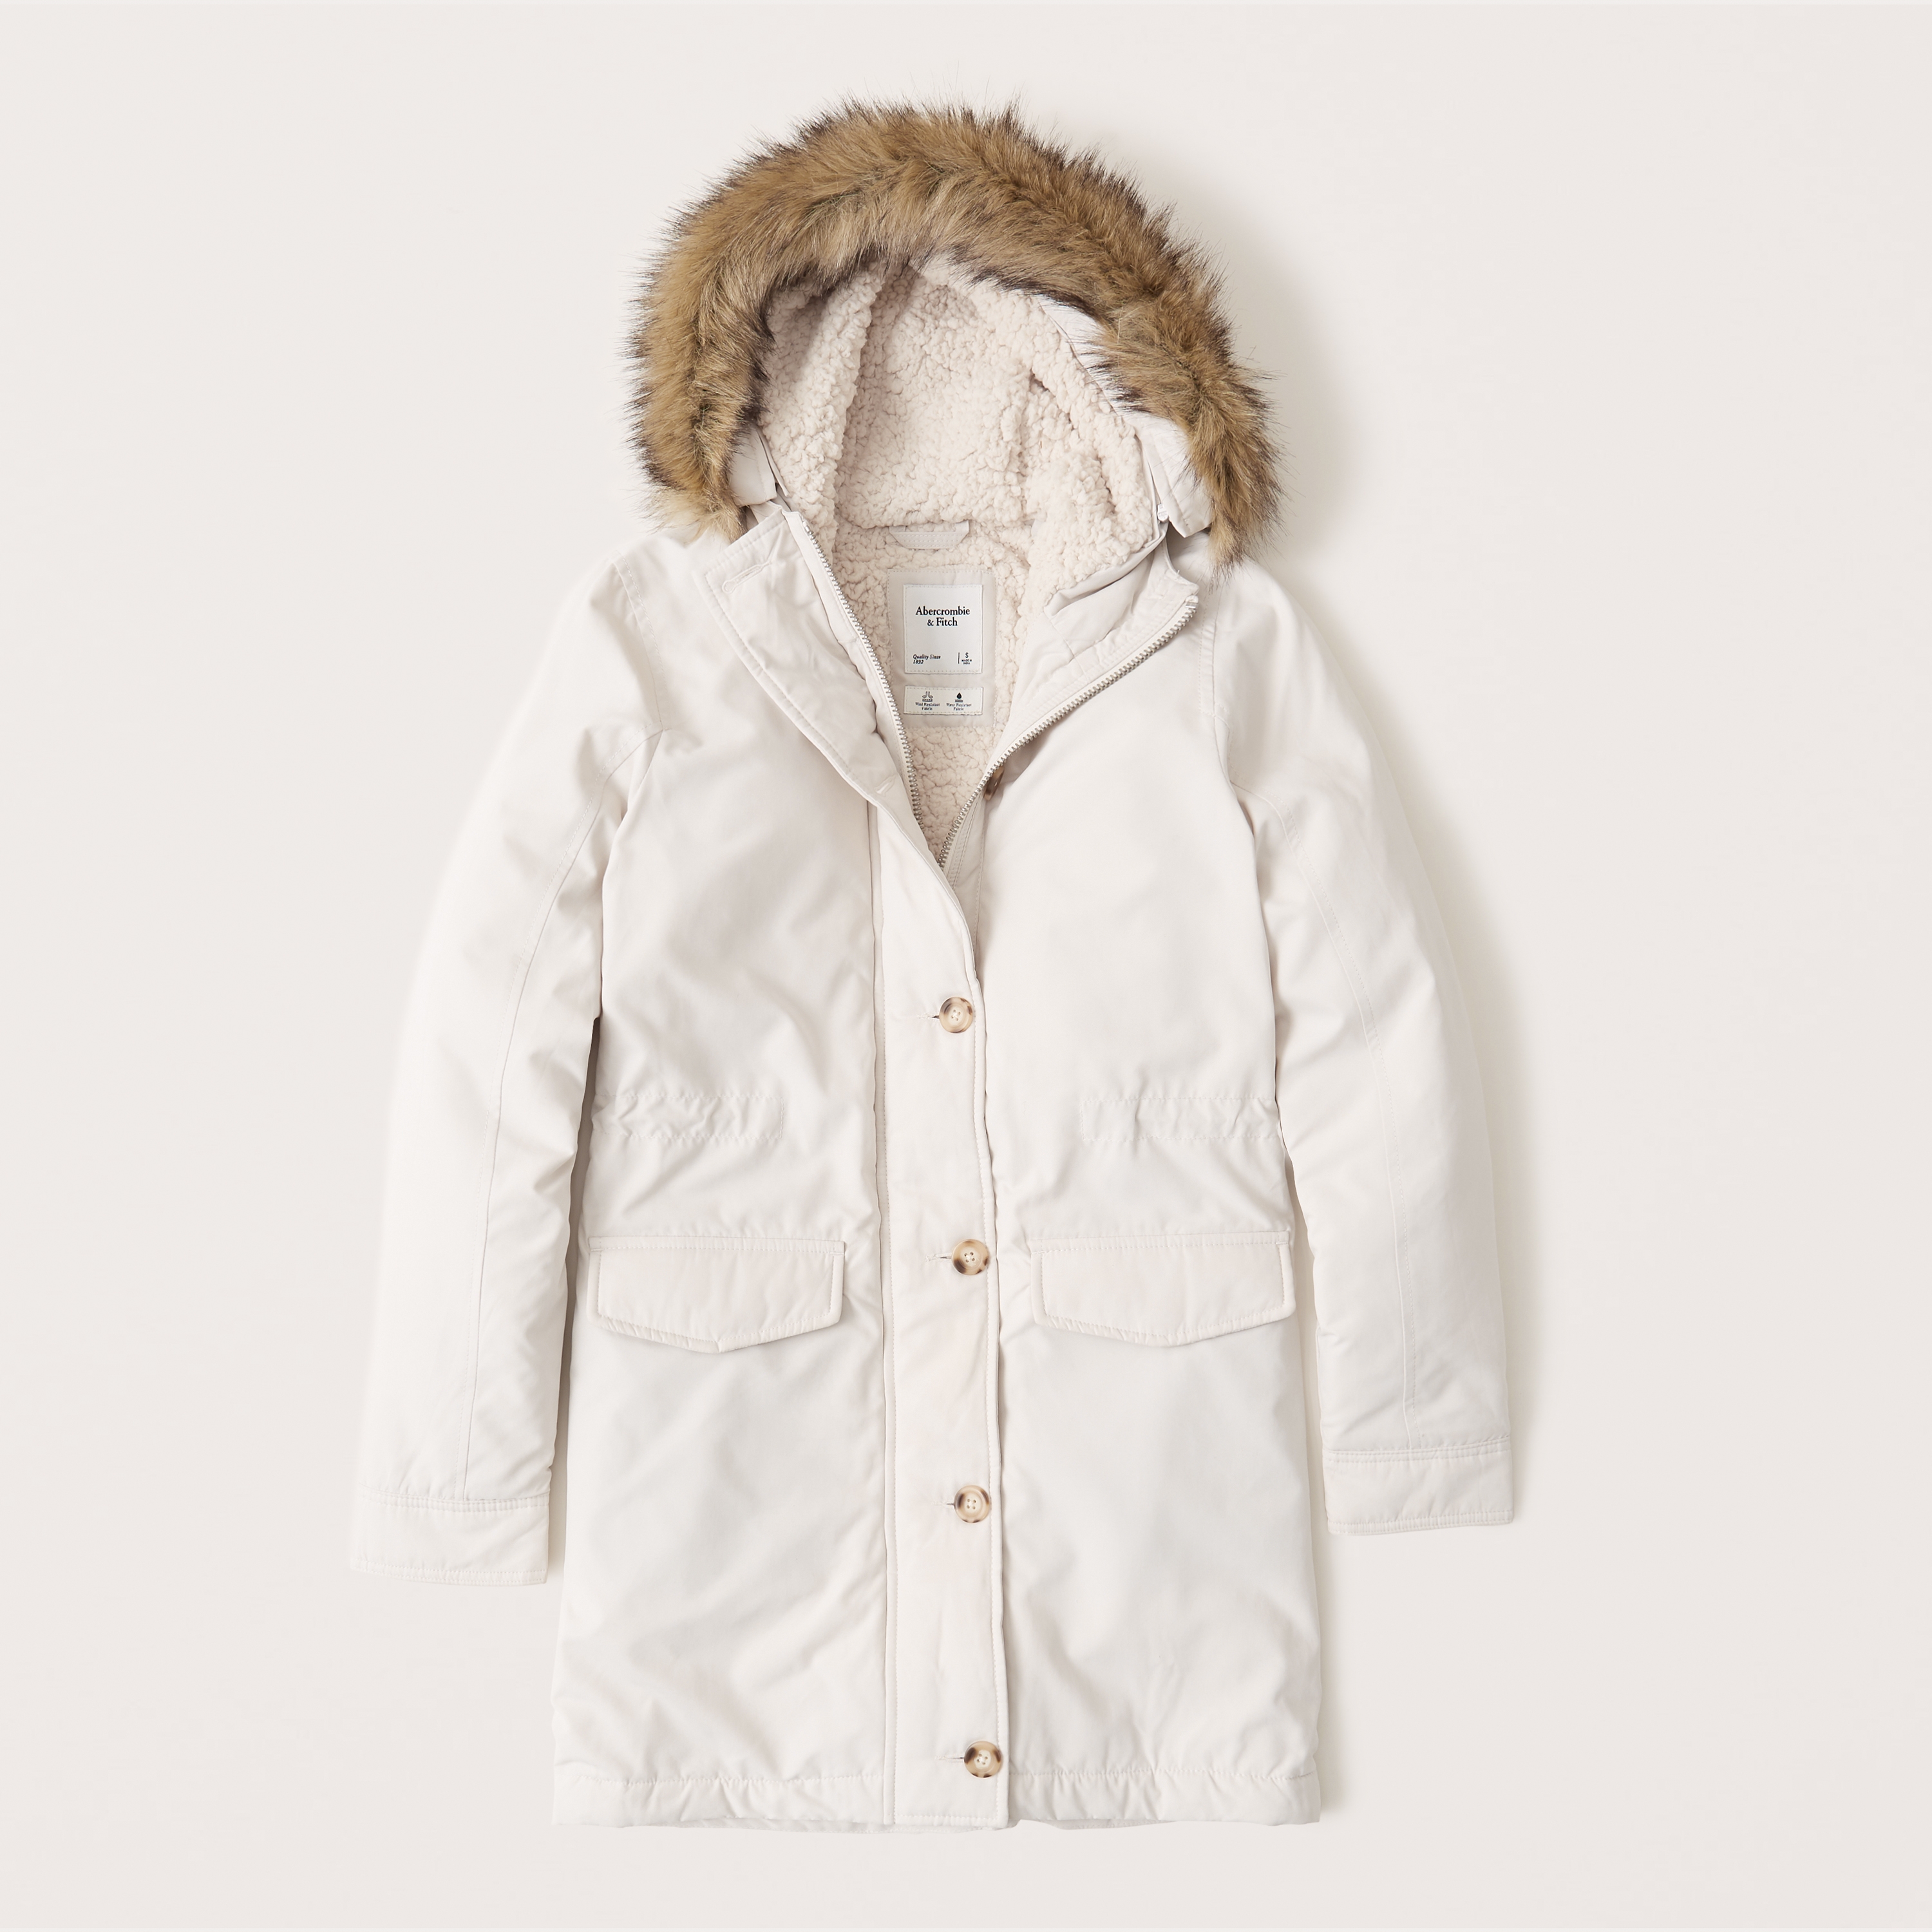 womens sherpa lined military jacket